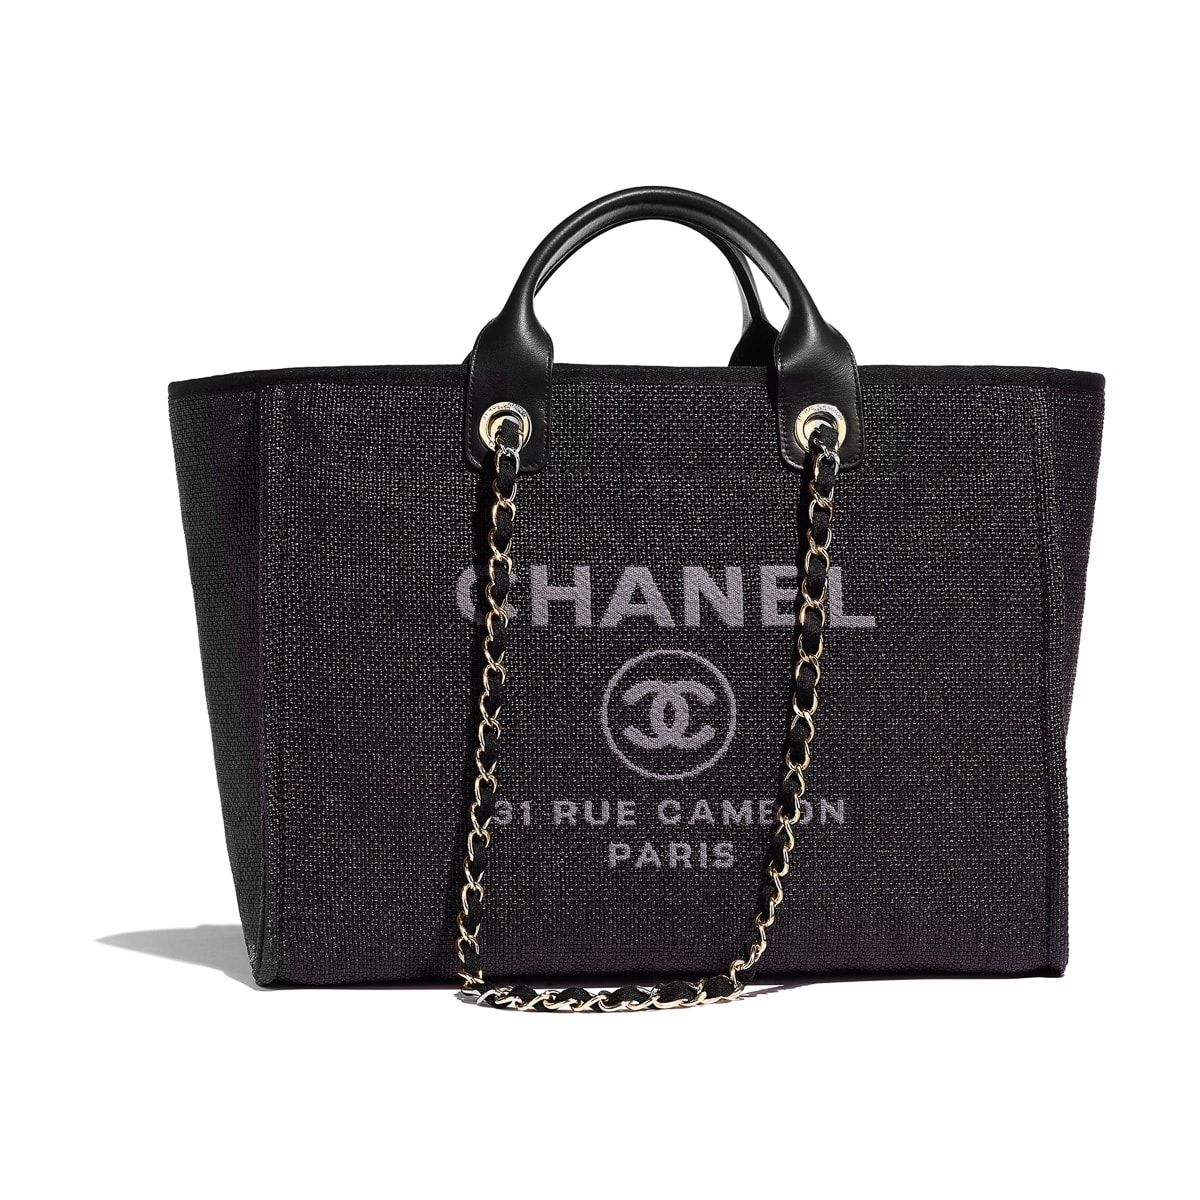 CHANEL DEAUVILLE 3 YEAR REVIEW  WHAT FITS, WEAR AND TEAR 